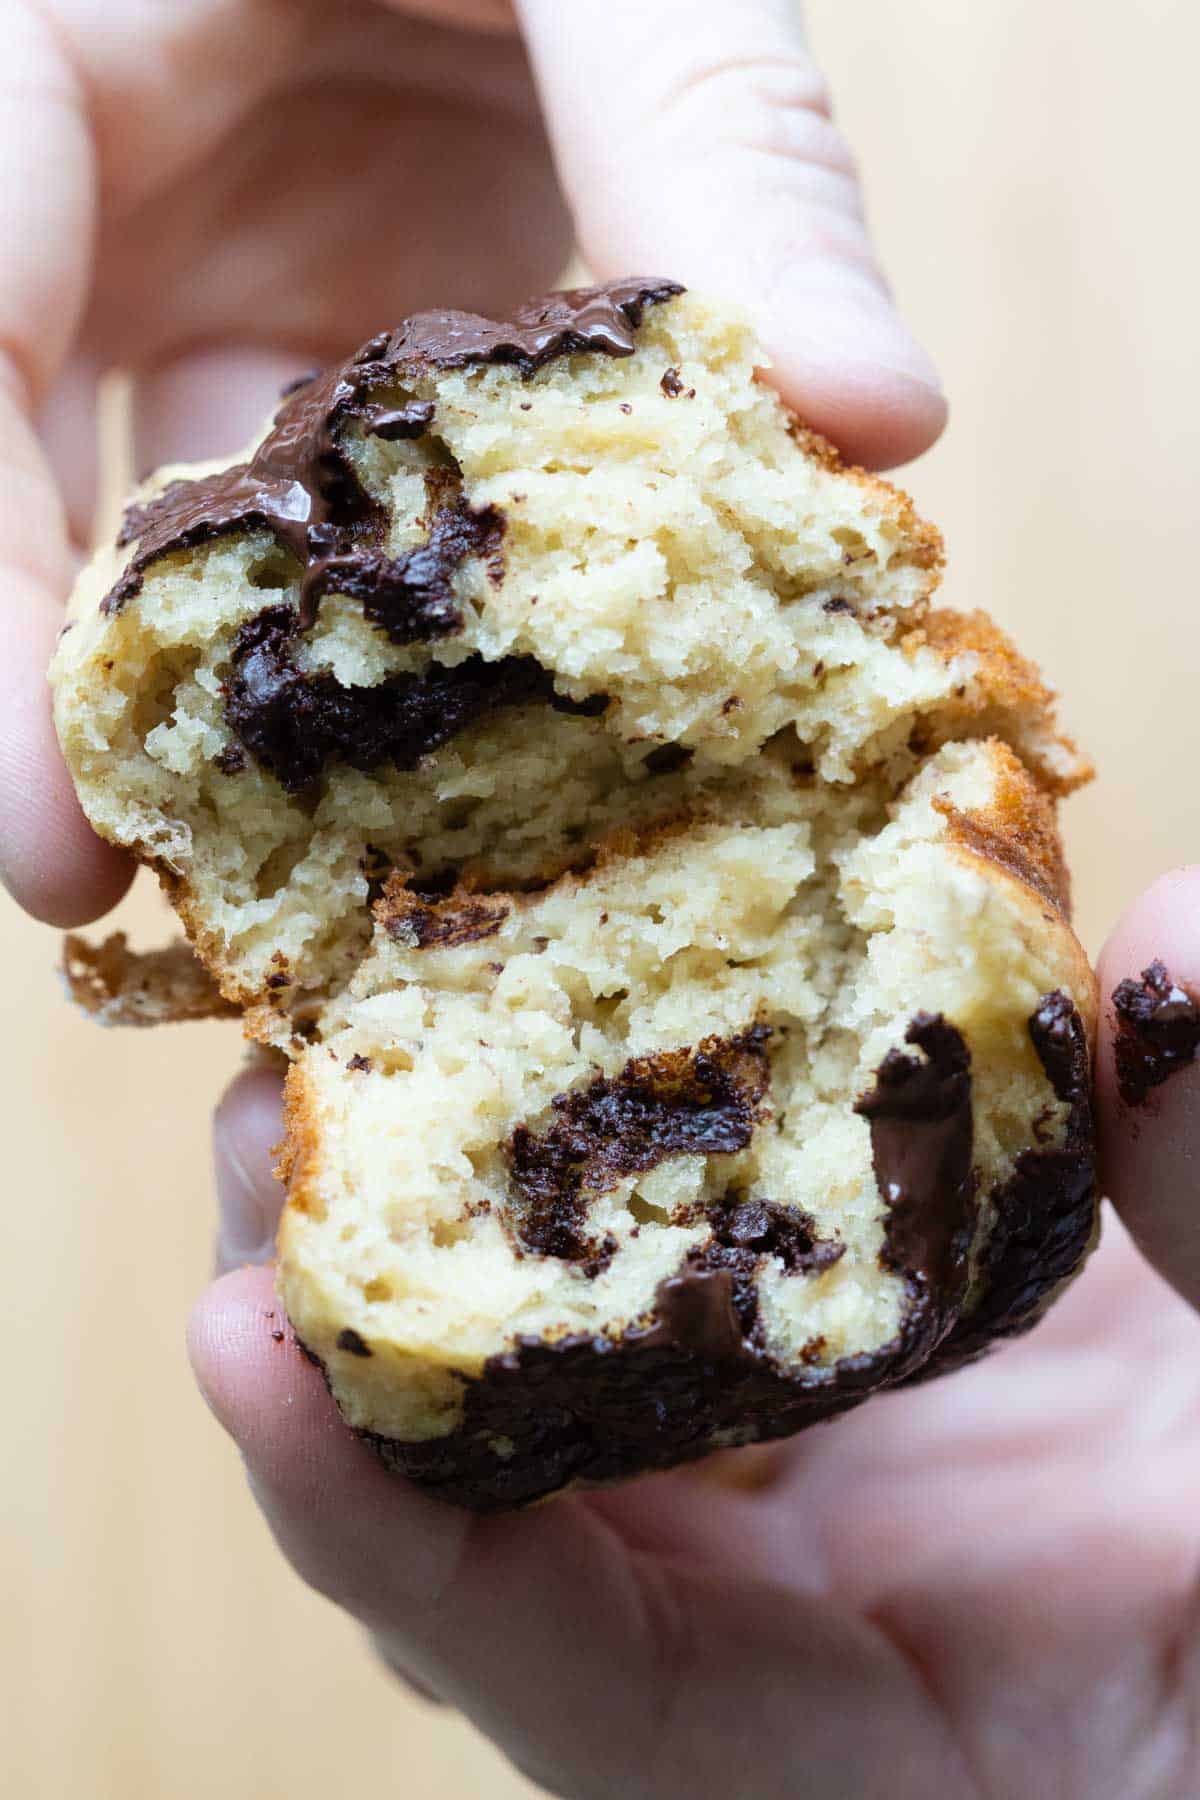 hands pulling apart a healthy banana muffin showing inside texture and dark chocolate bits.